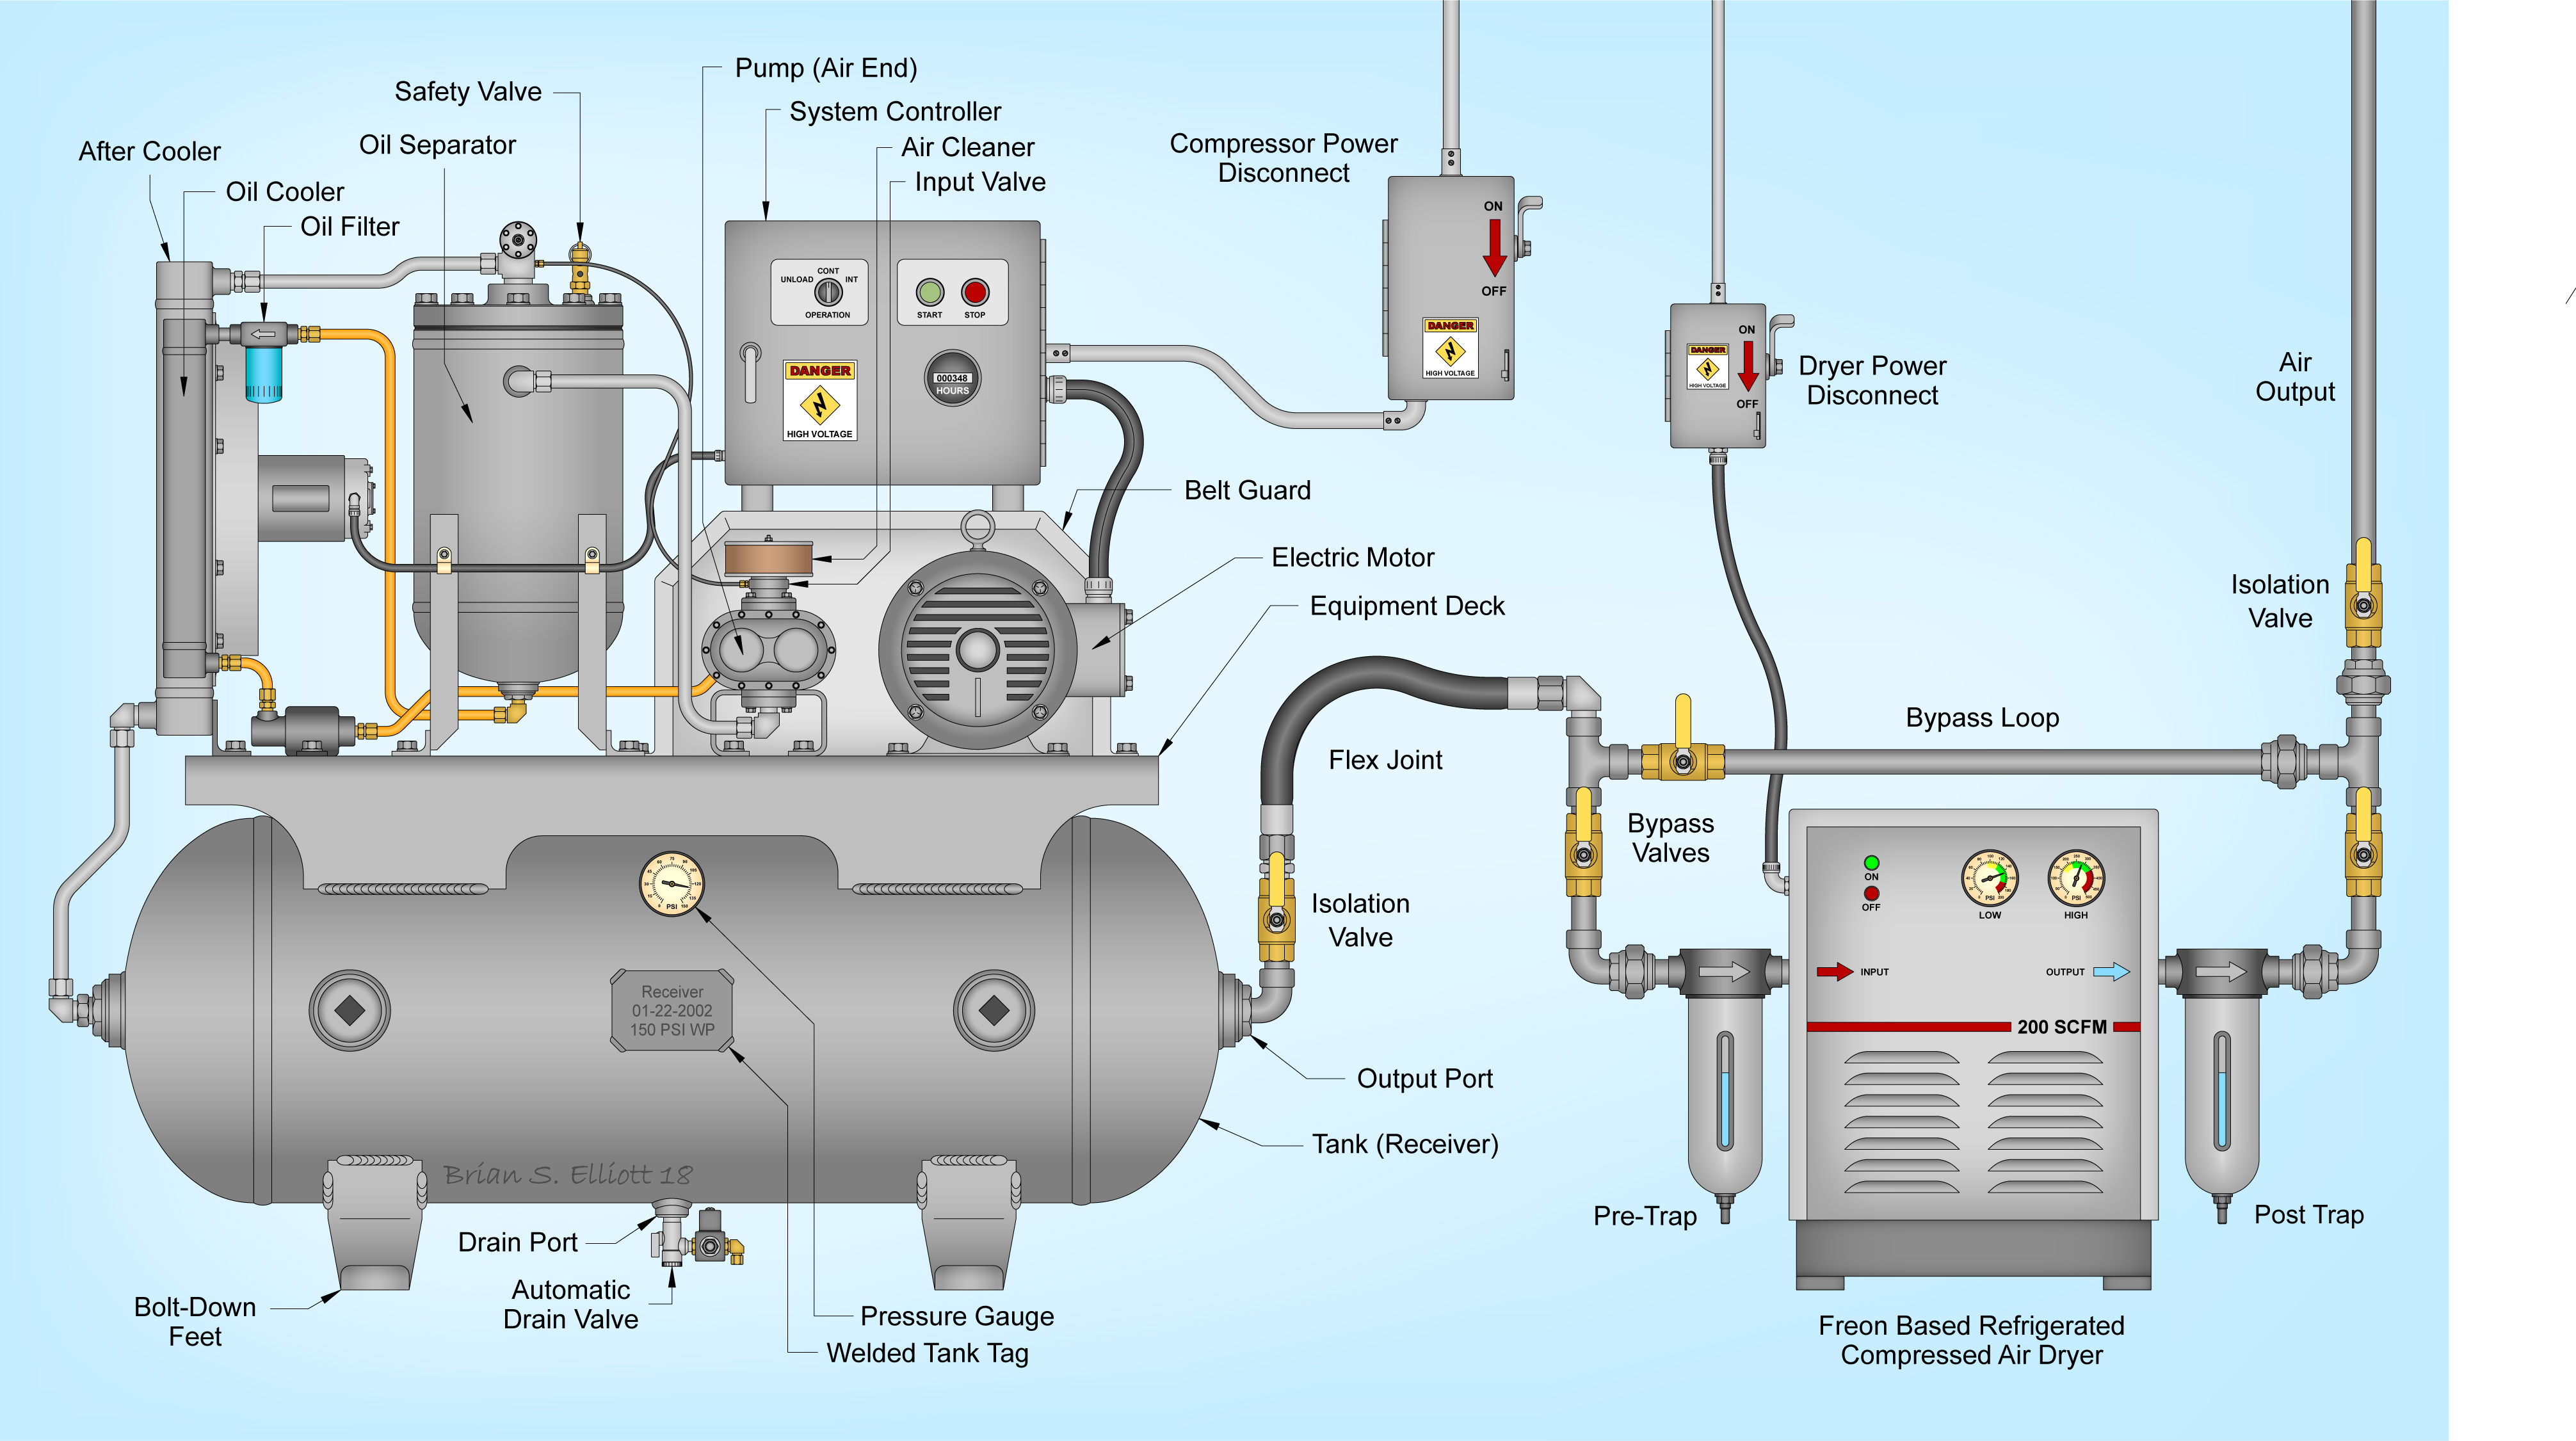 schedel voor het geval dat Mening File:Rotary-screw air compressor equipped with a CFC based refrigerated  compressed air dryer.jpg - Wikimedia Commons